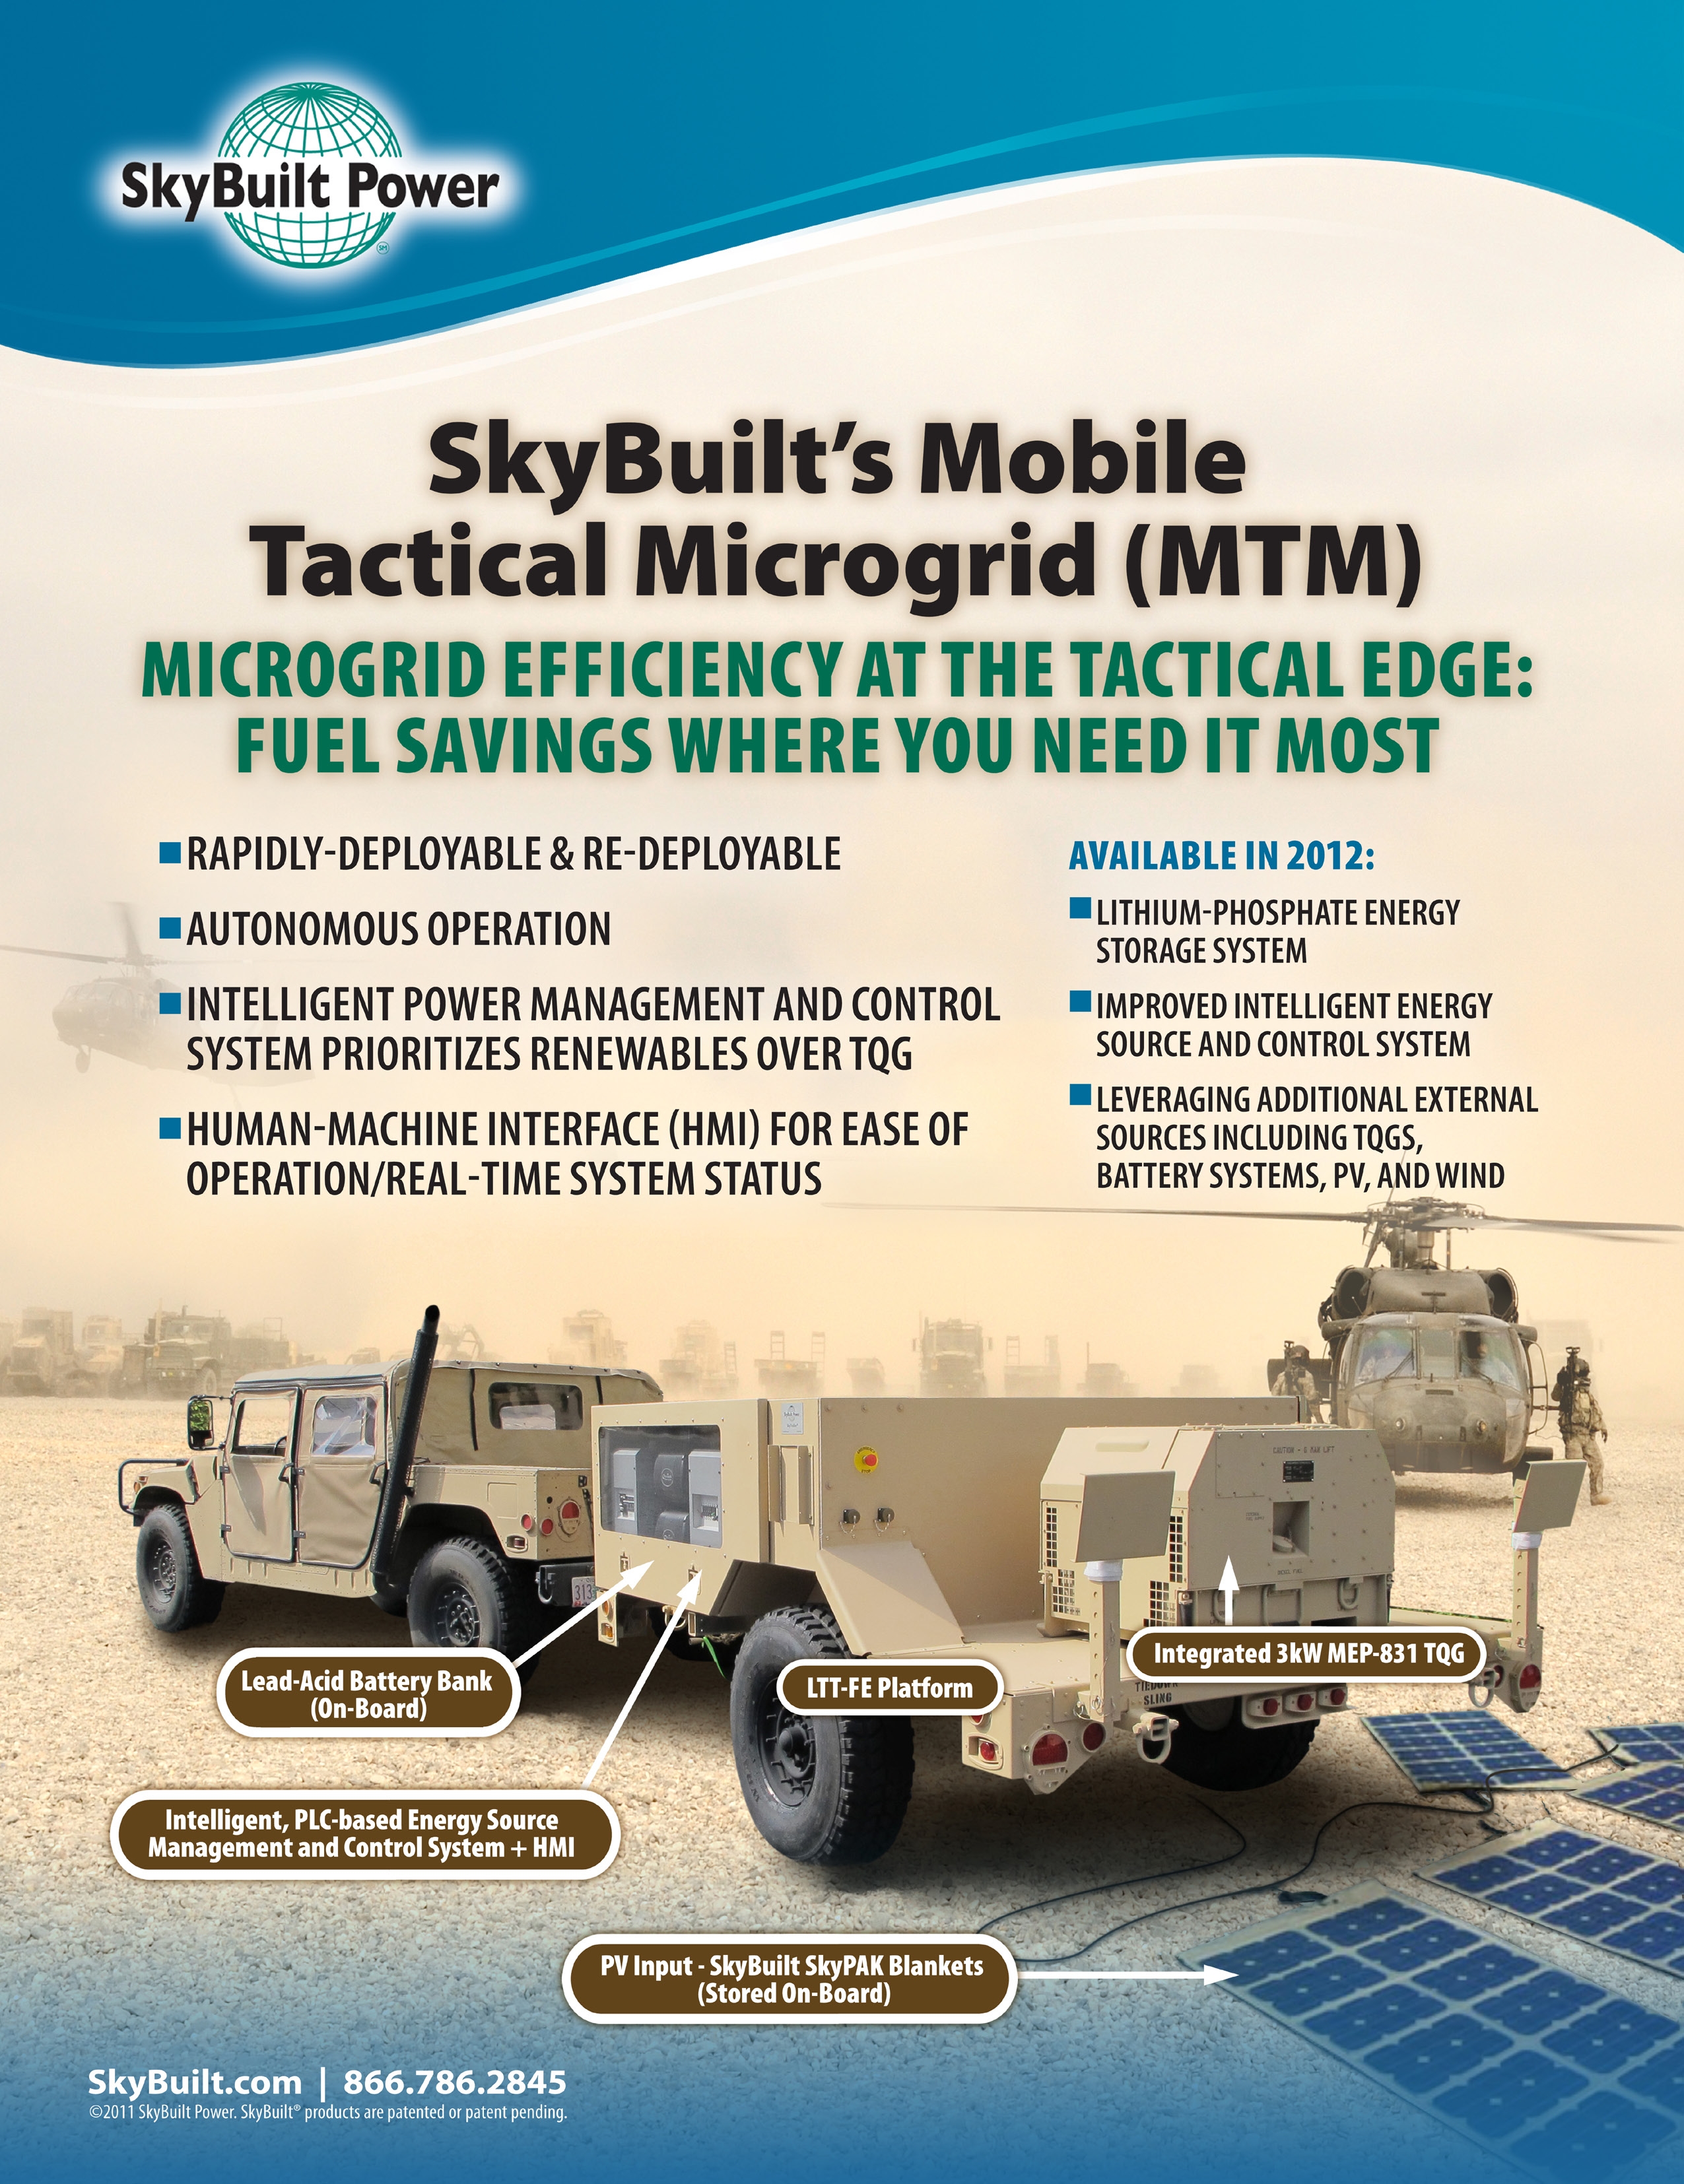 SkyBuilt's Mobile Tactical Microgrid (MTM)